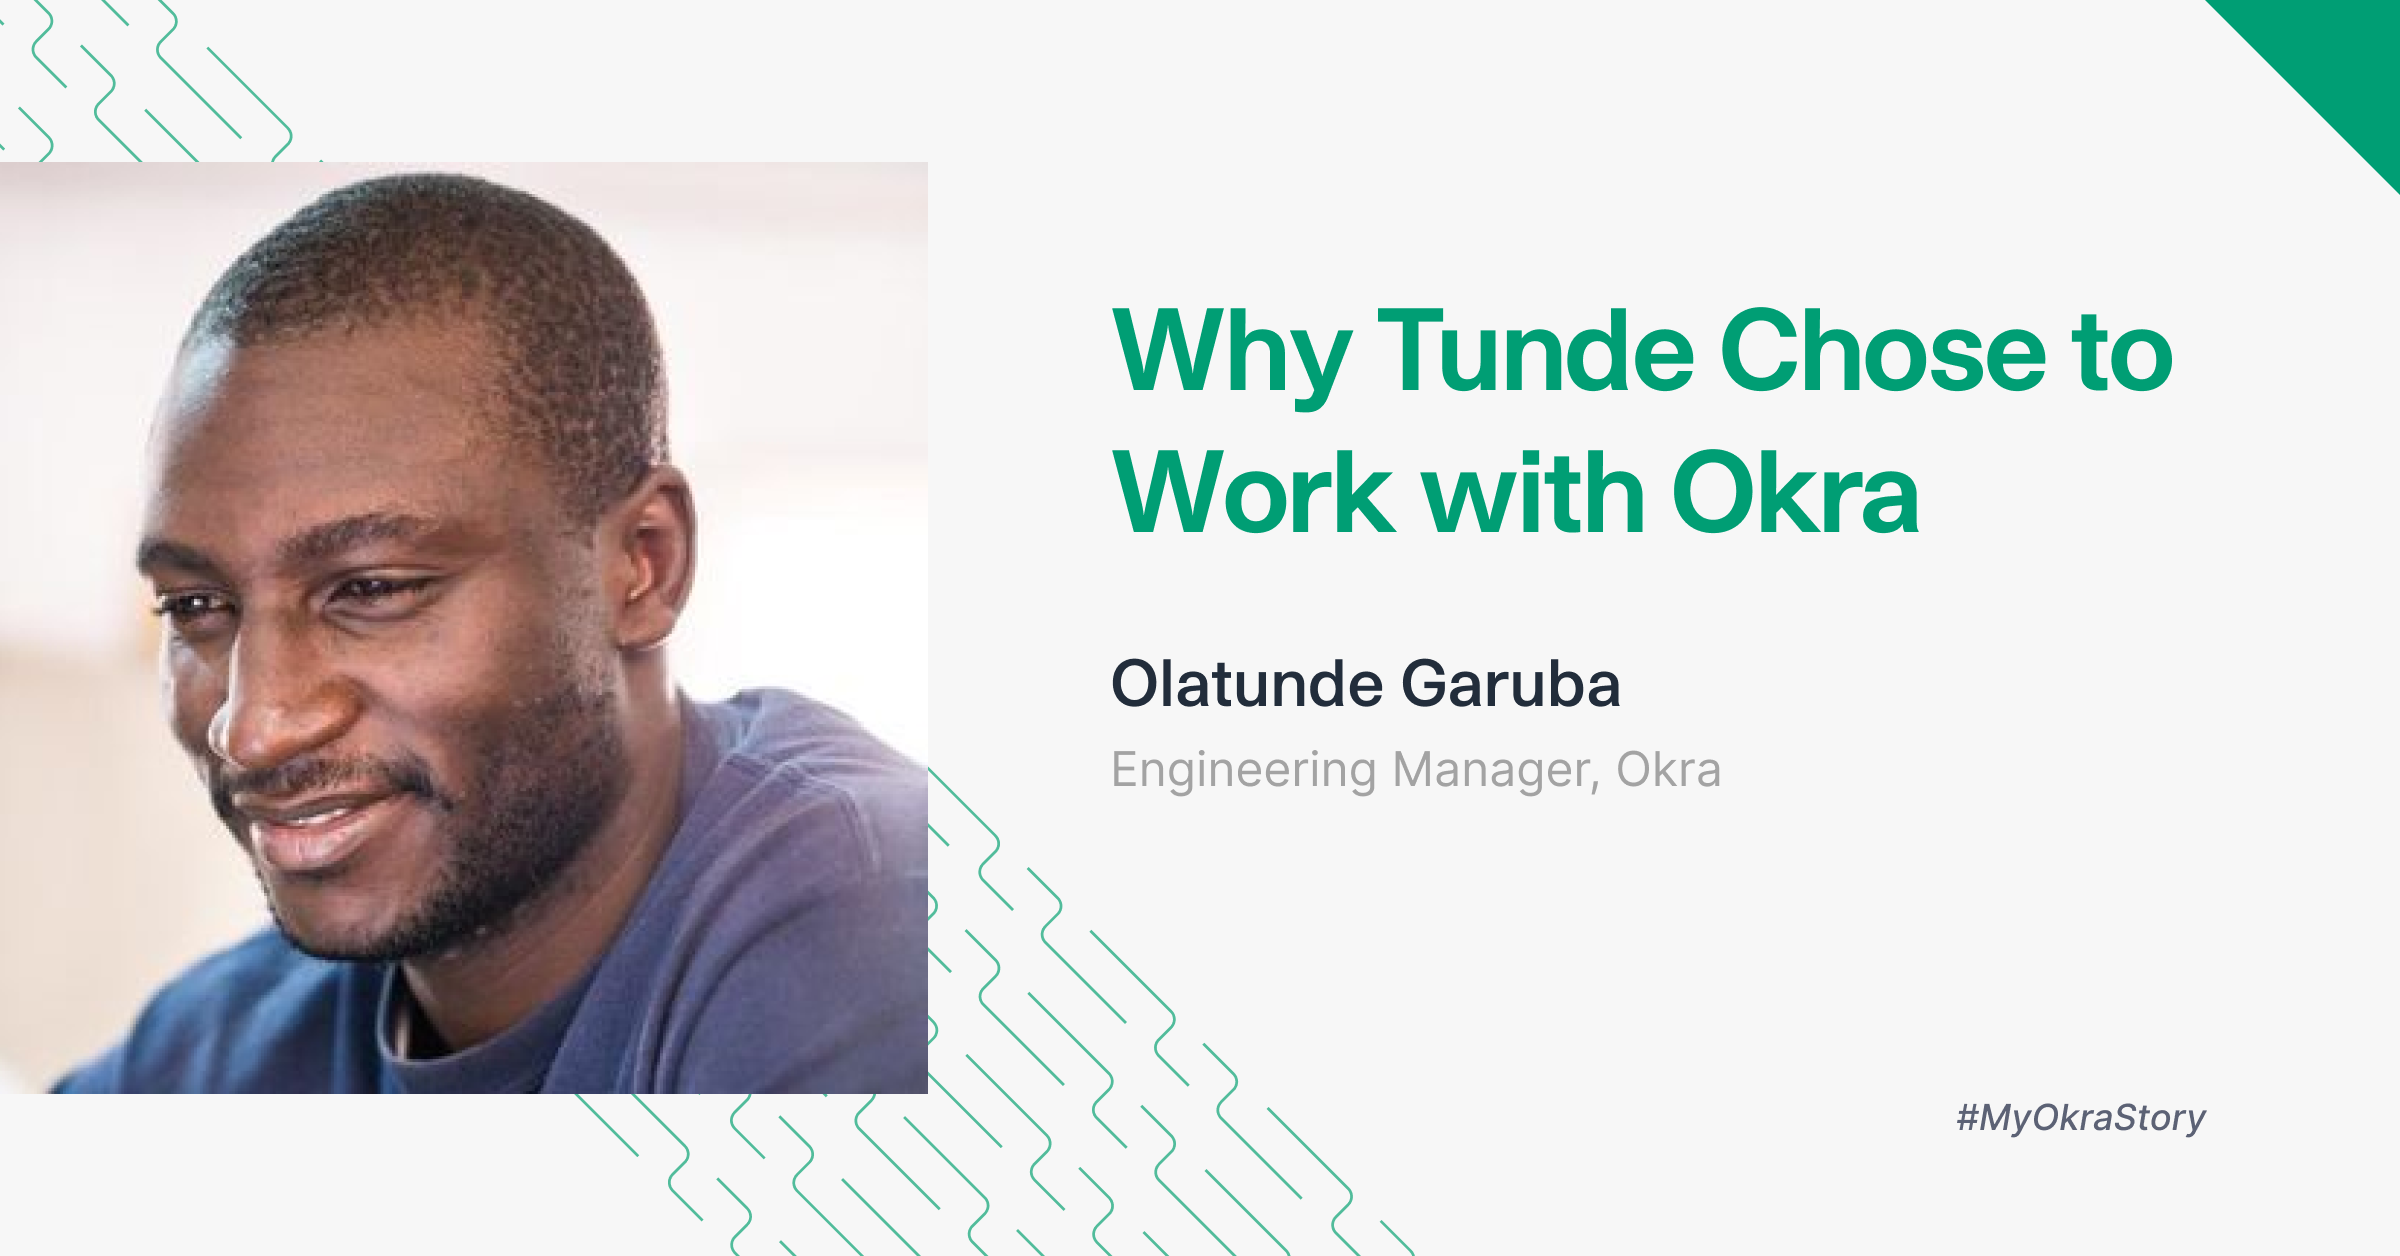 Why Tunde Chose to Work with Okra